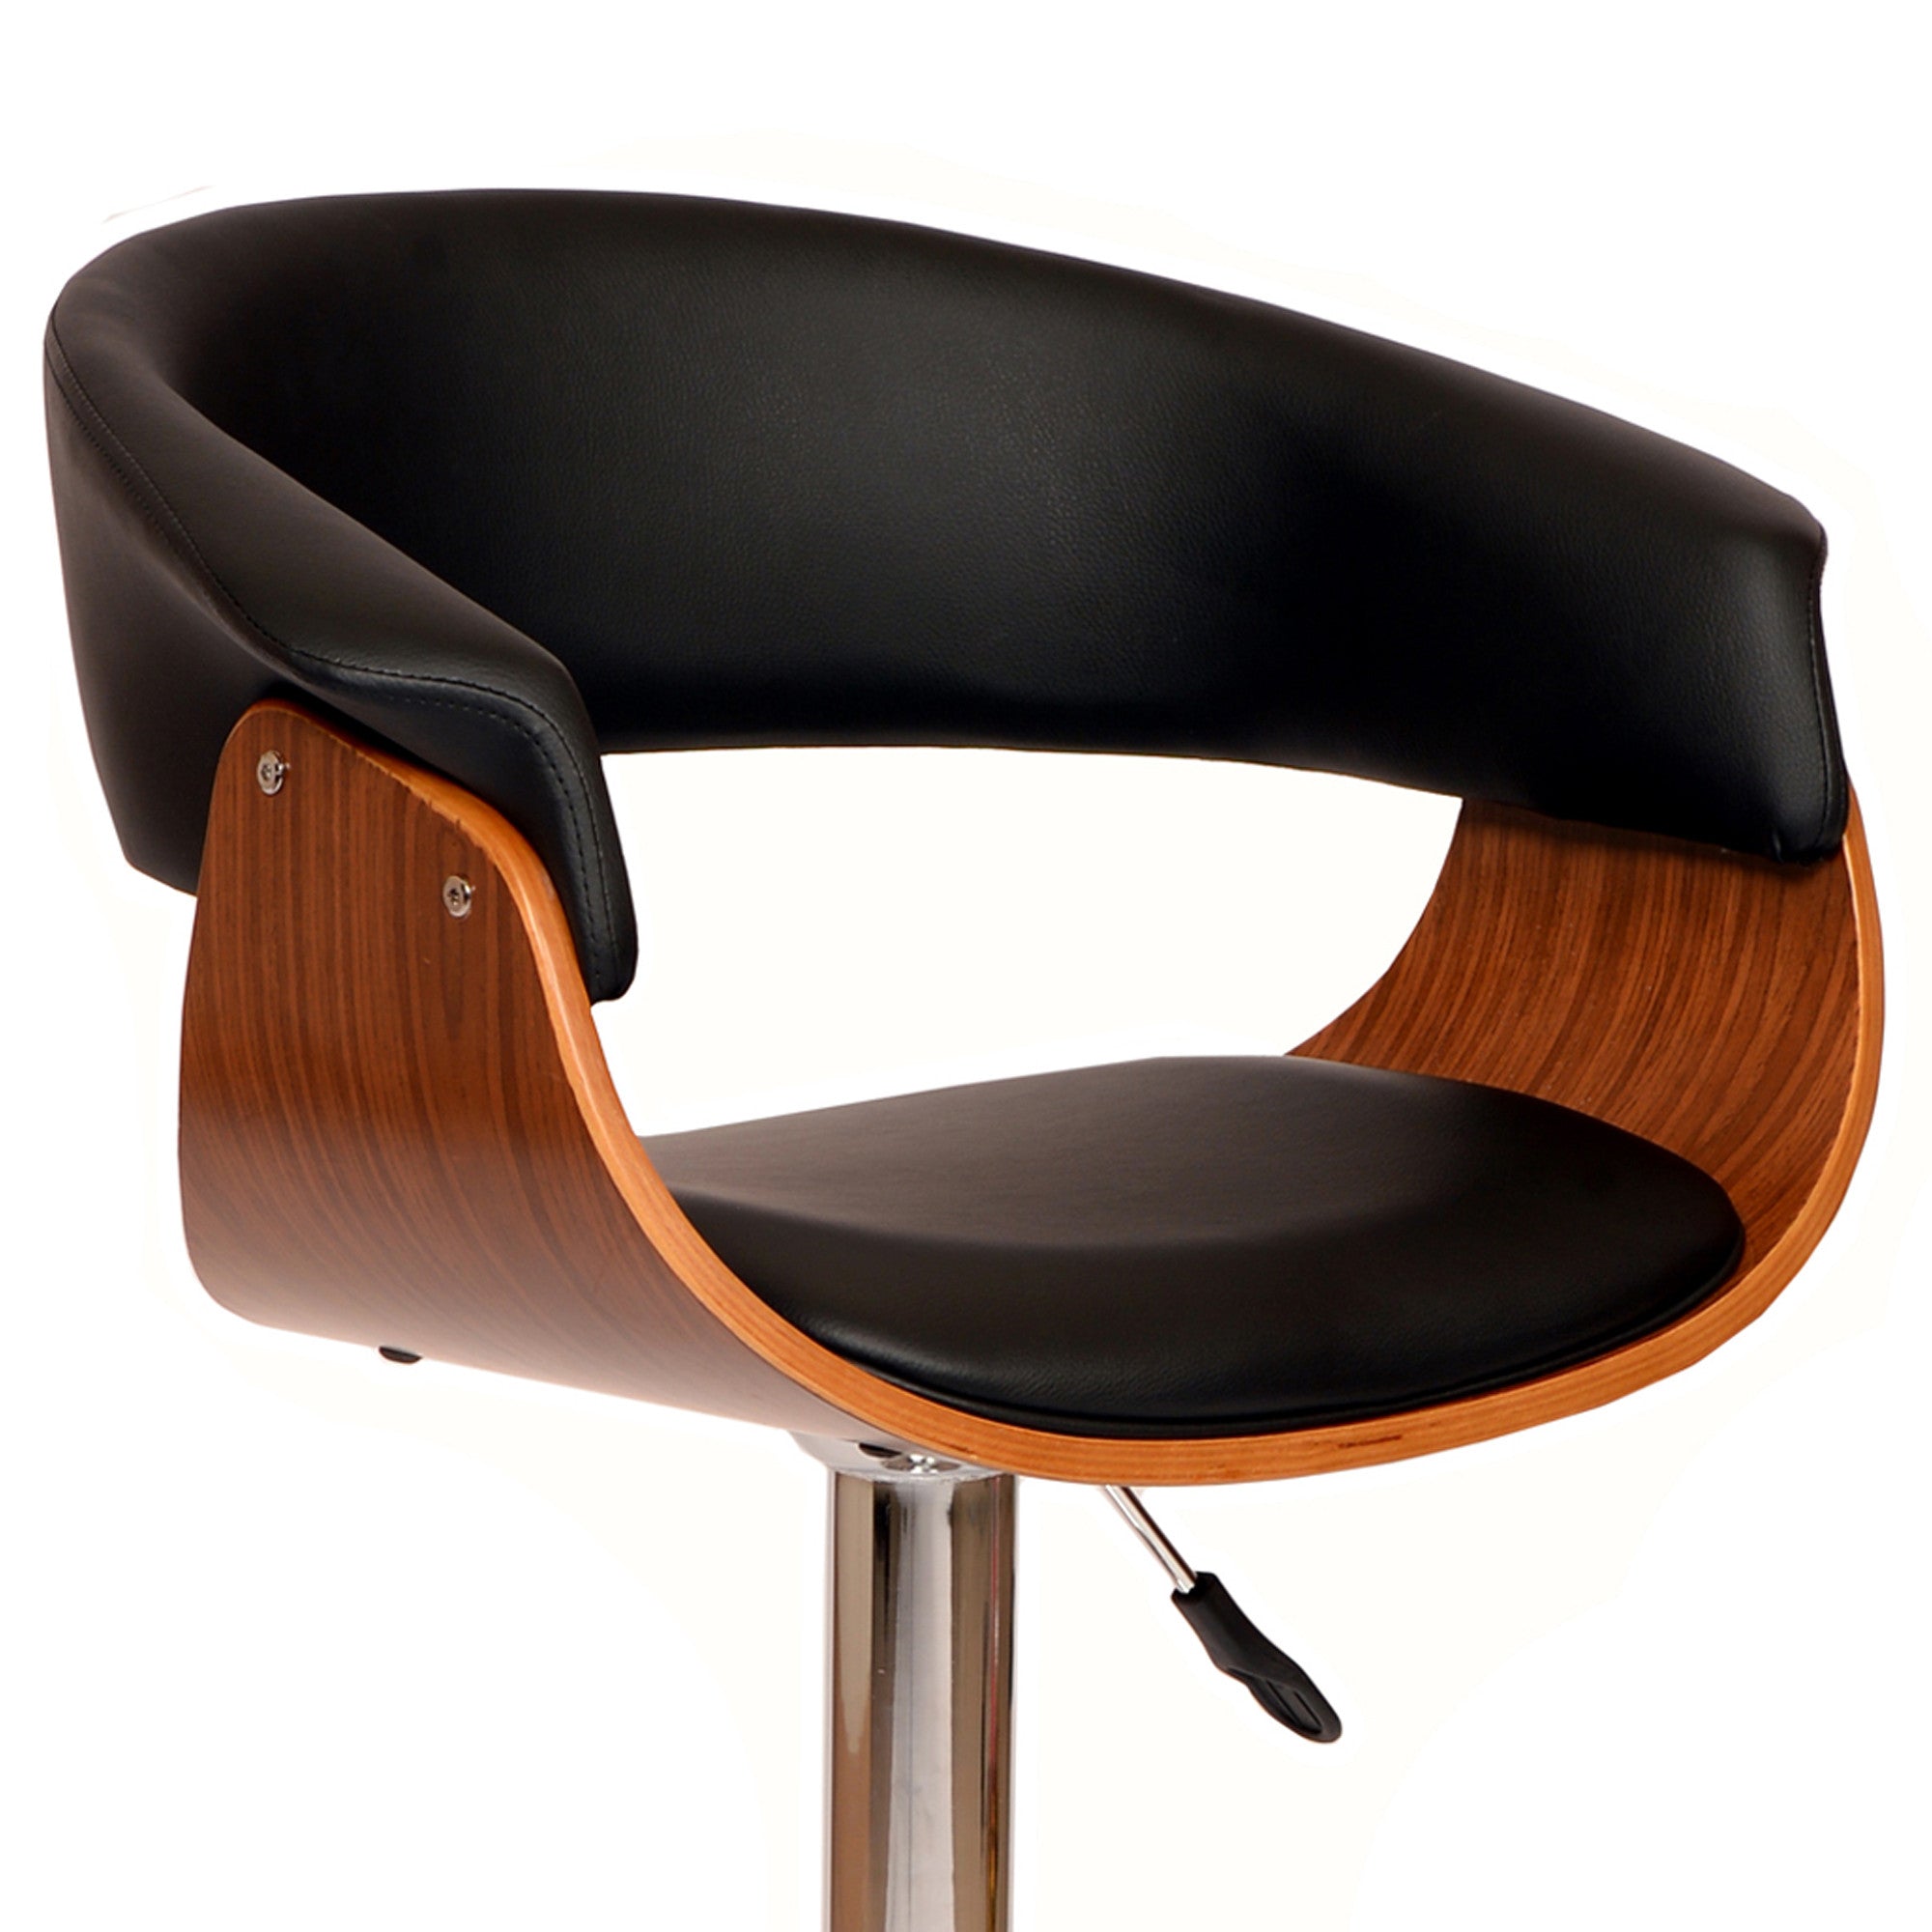 24" Black And Brown Faux Leather And Solid Wood Swivel Low Back Adjustable Height Bar Chair